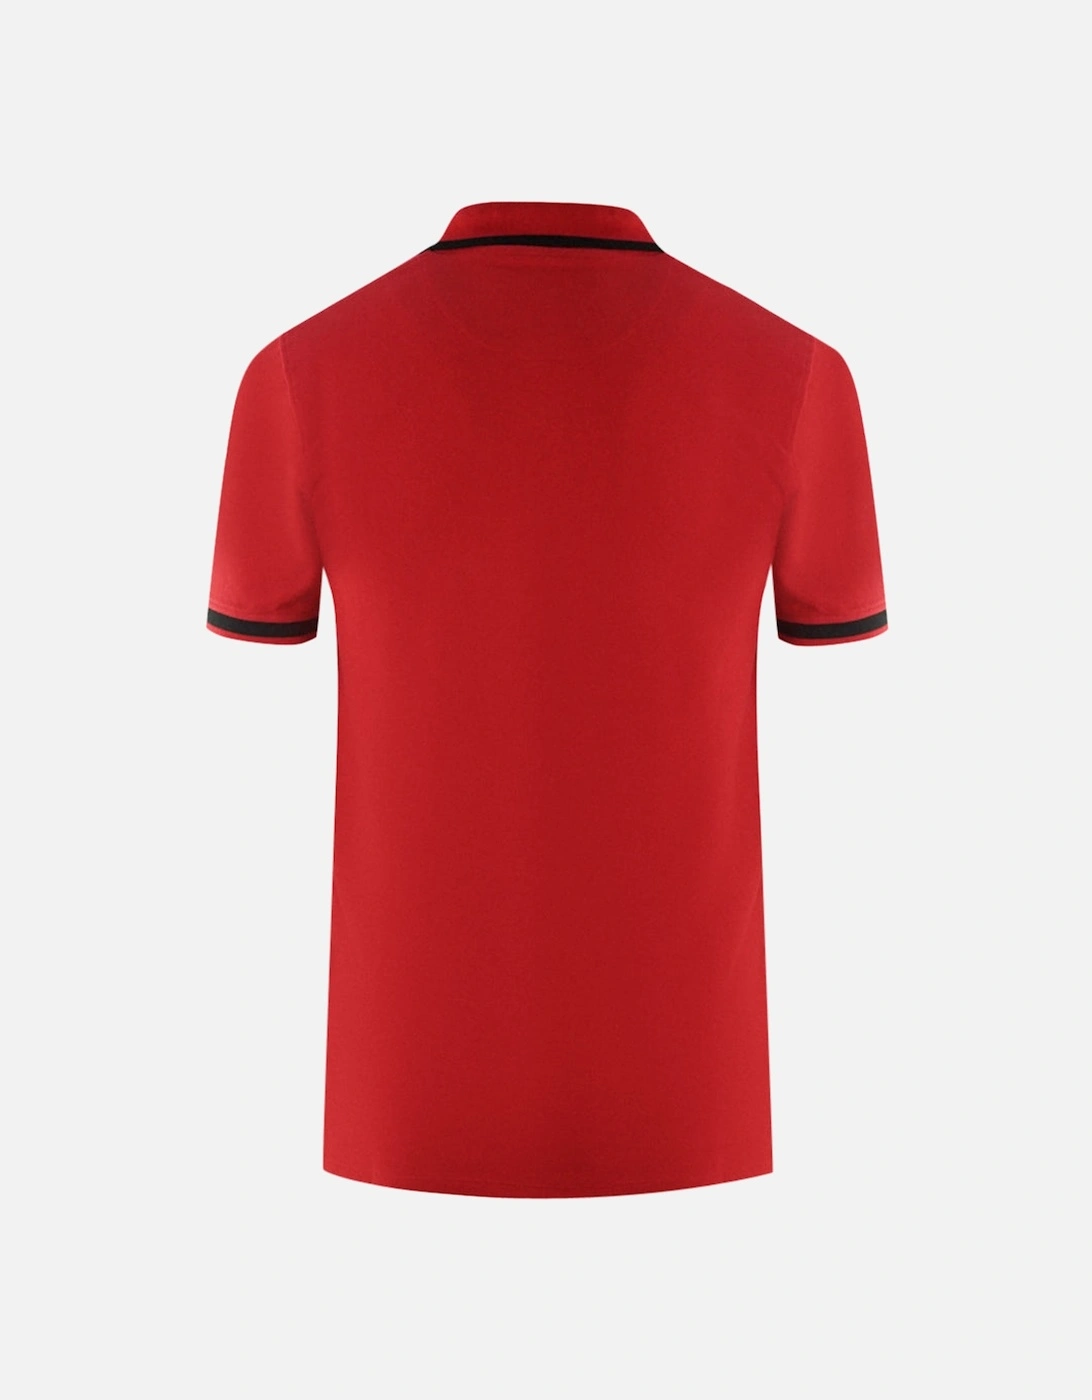 AQ 1851 Embroidered Tipped Red Polo Shirt